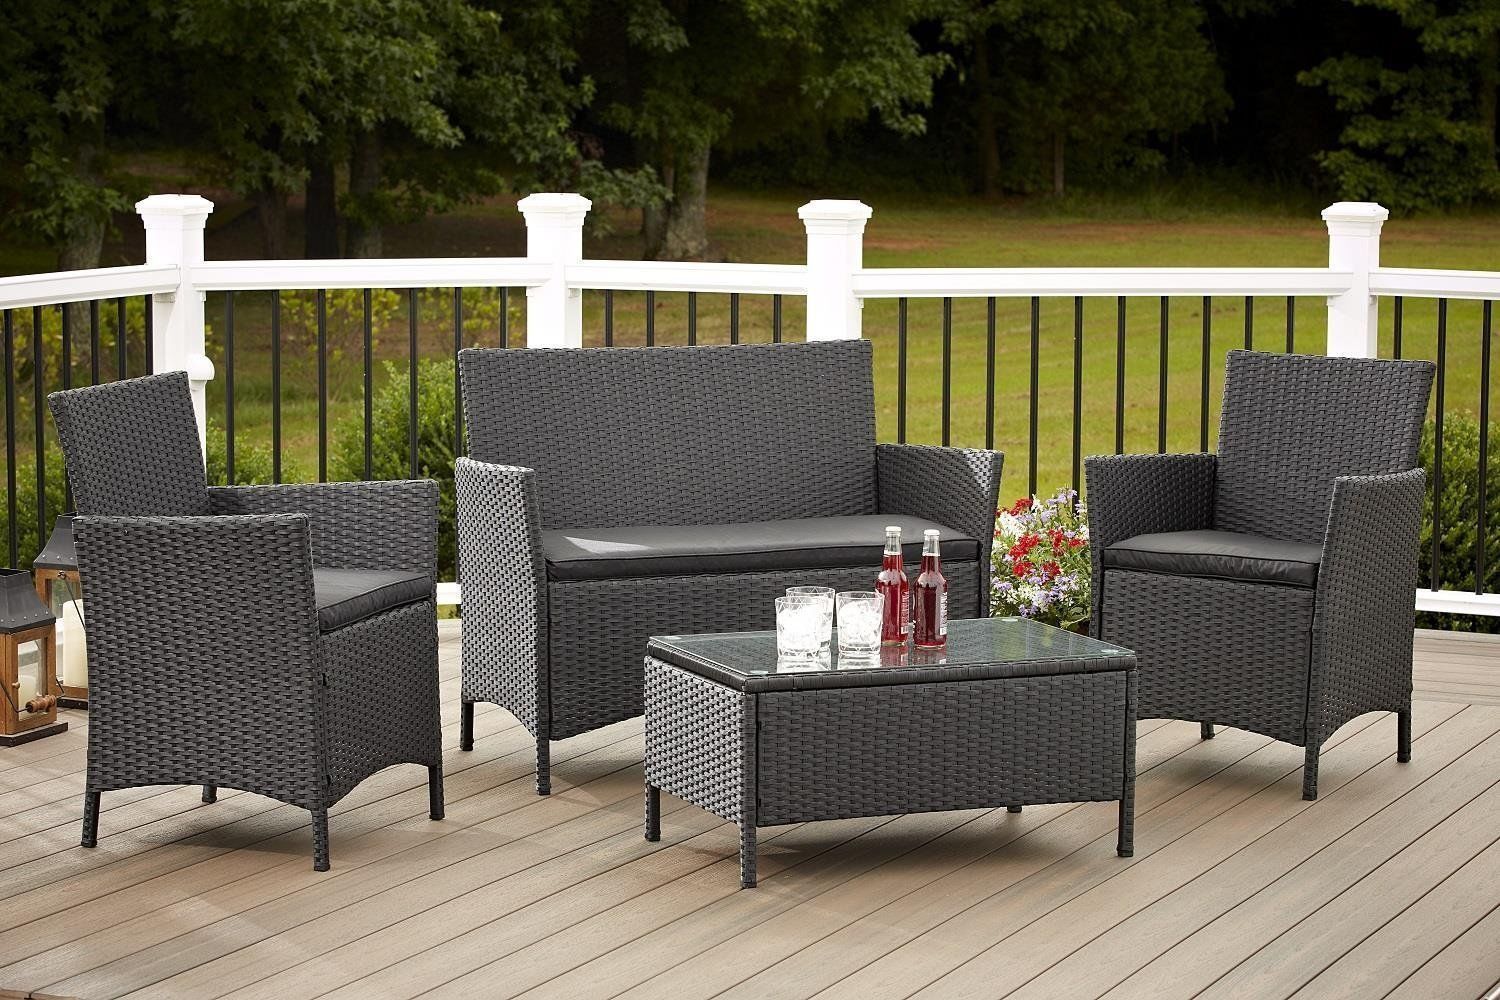 Jamaica 4 Piece Patio Furniture Set In Outdoor Resin Wicker With Black Intended For 4 Piece Outdoor Patio Sets (View 2 of 15)